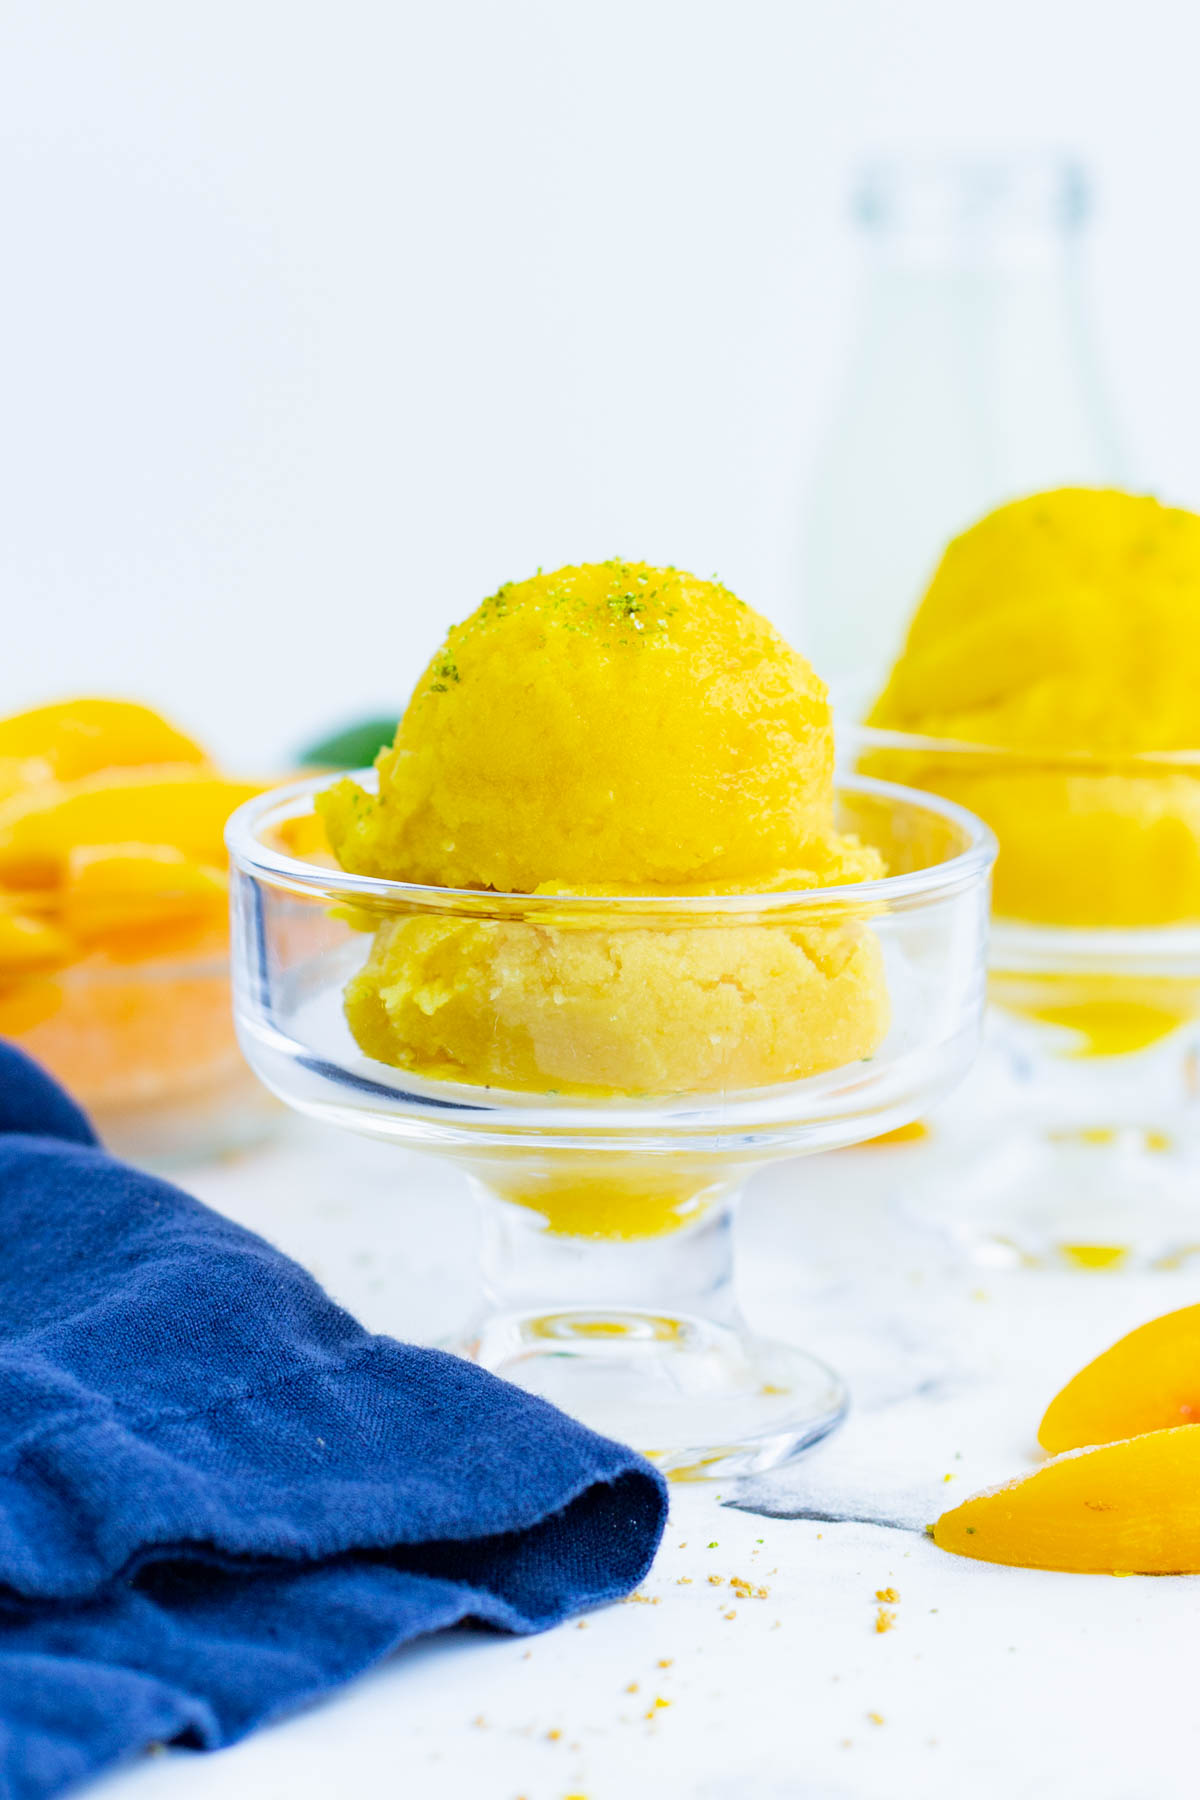 Peach sorbet is a refreshing treat in the summer months you can feel good about.